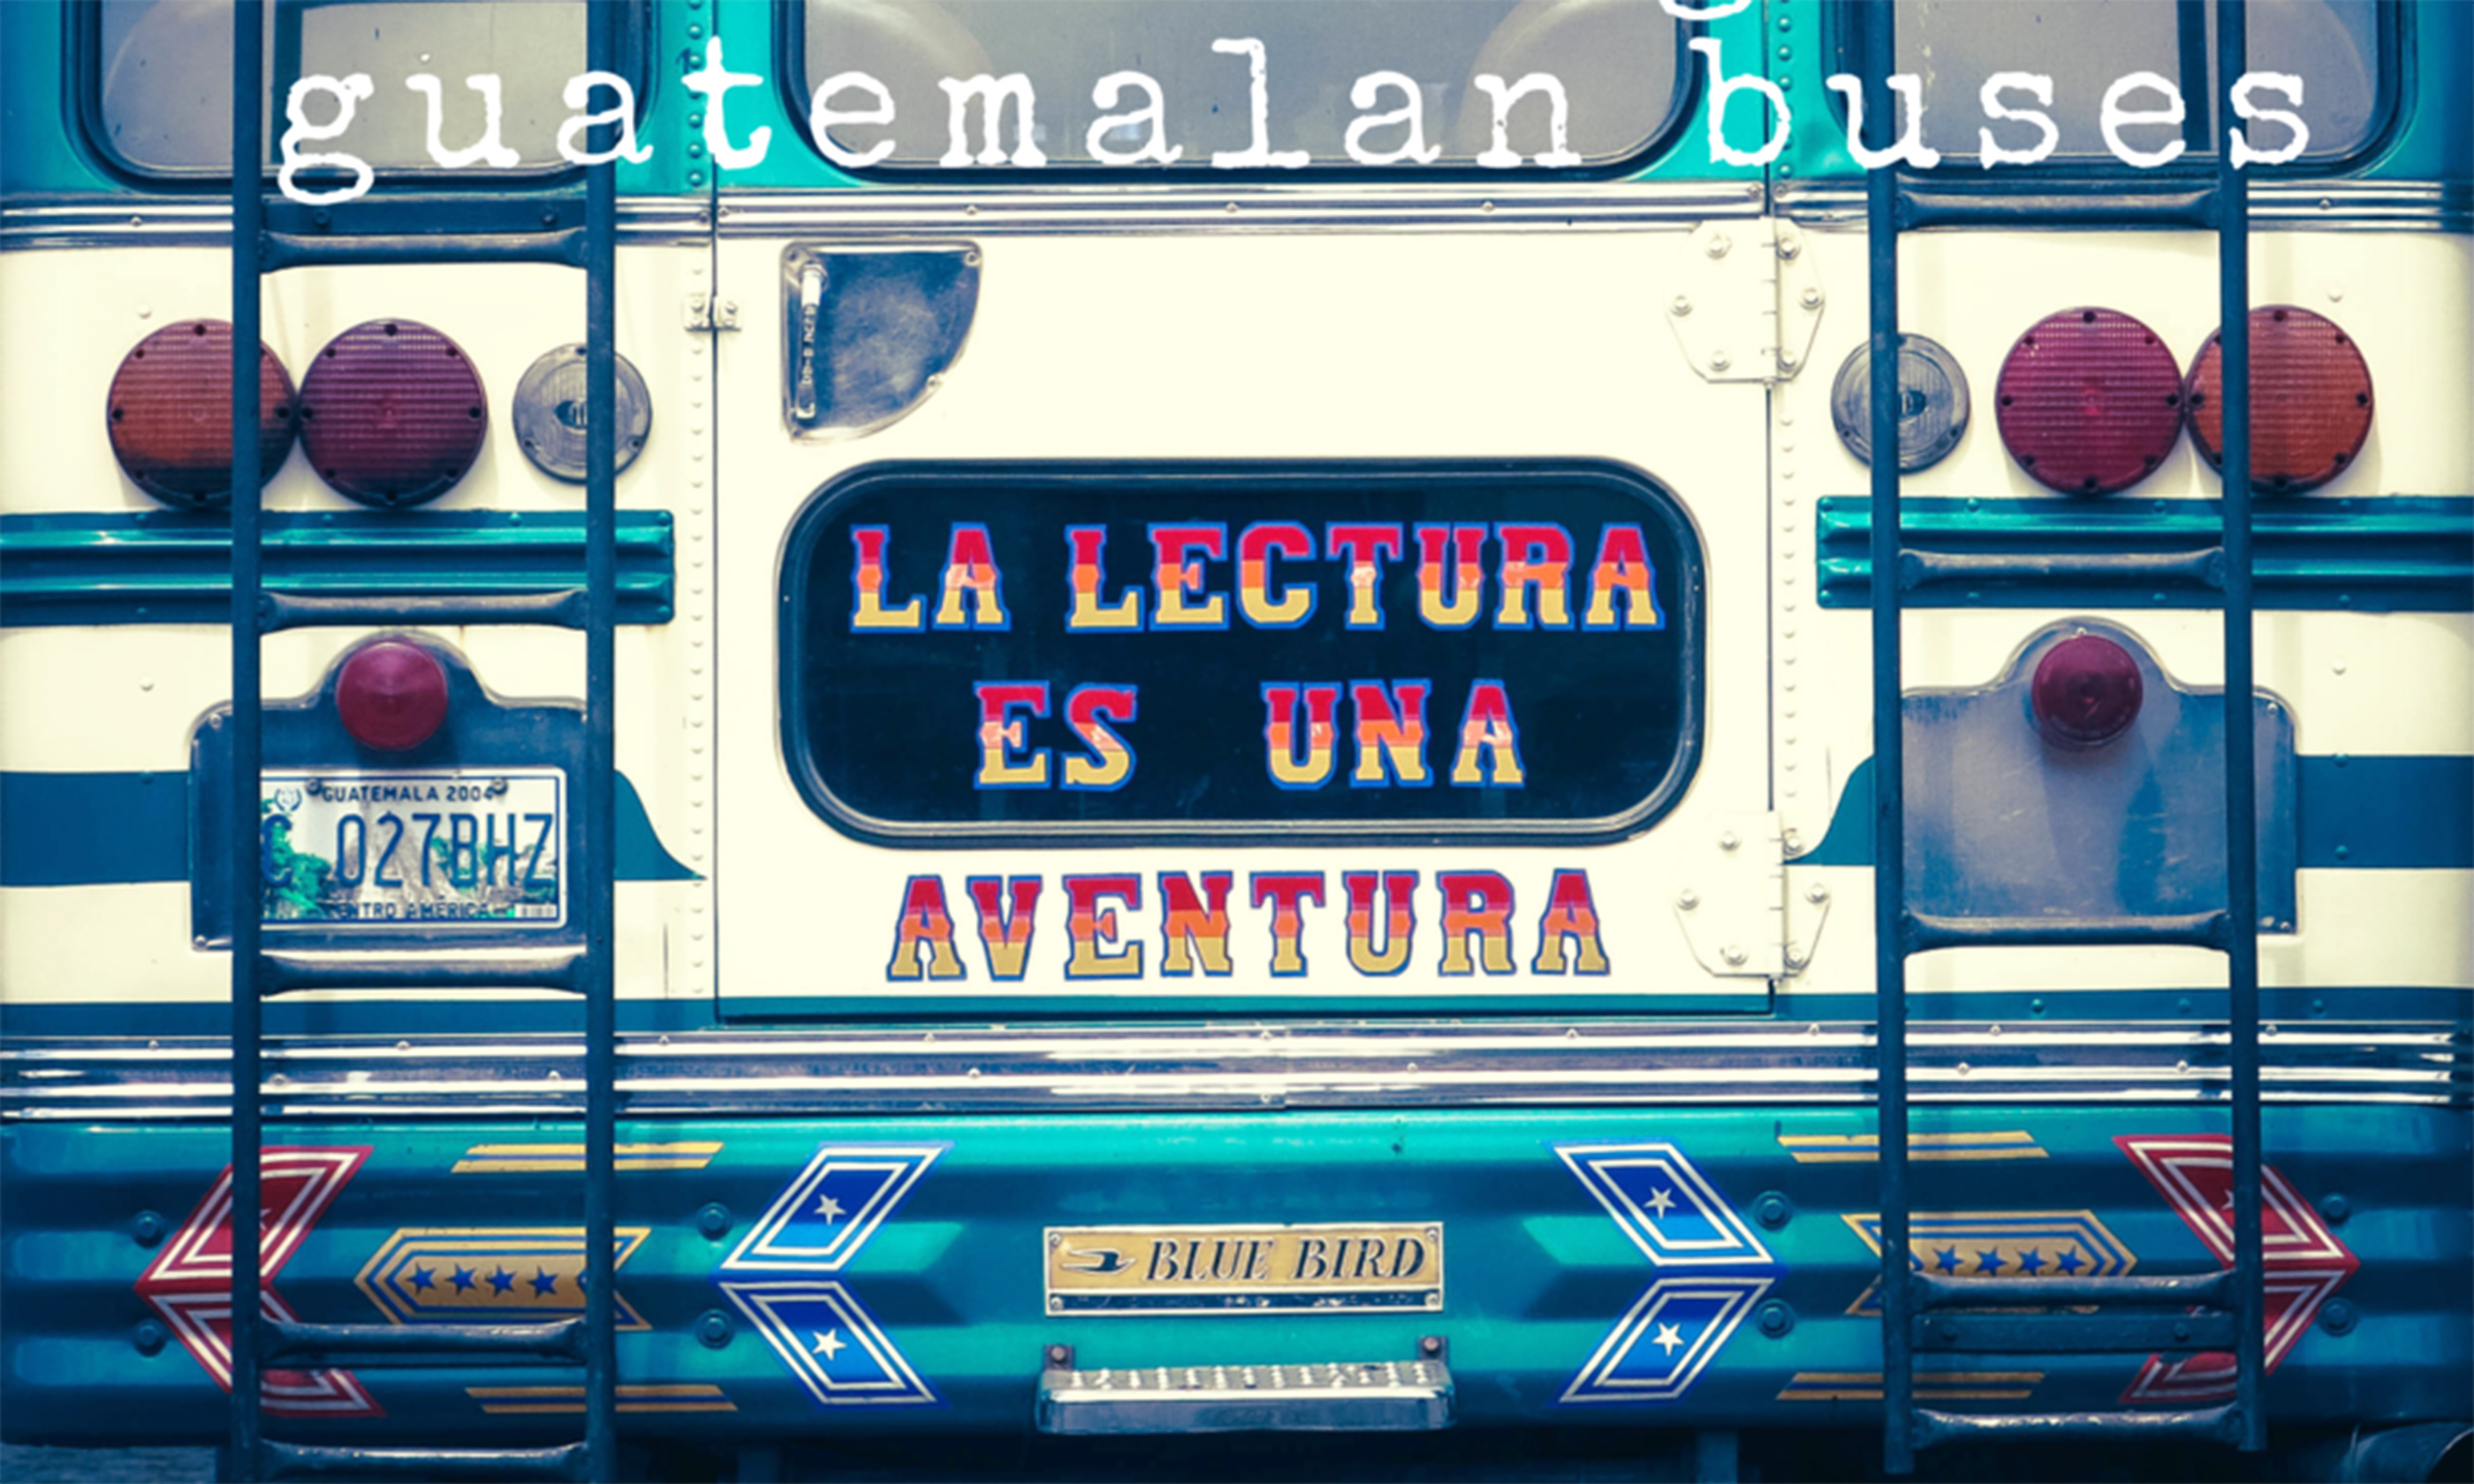 The back of a Guatemalan bus (Along Dusty Roads)